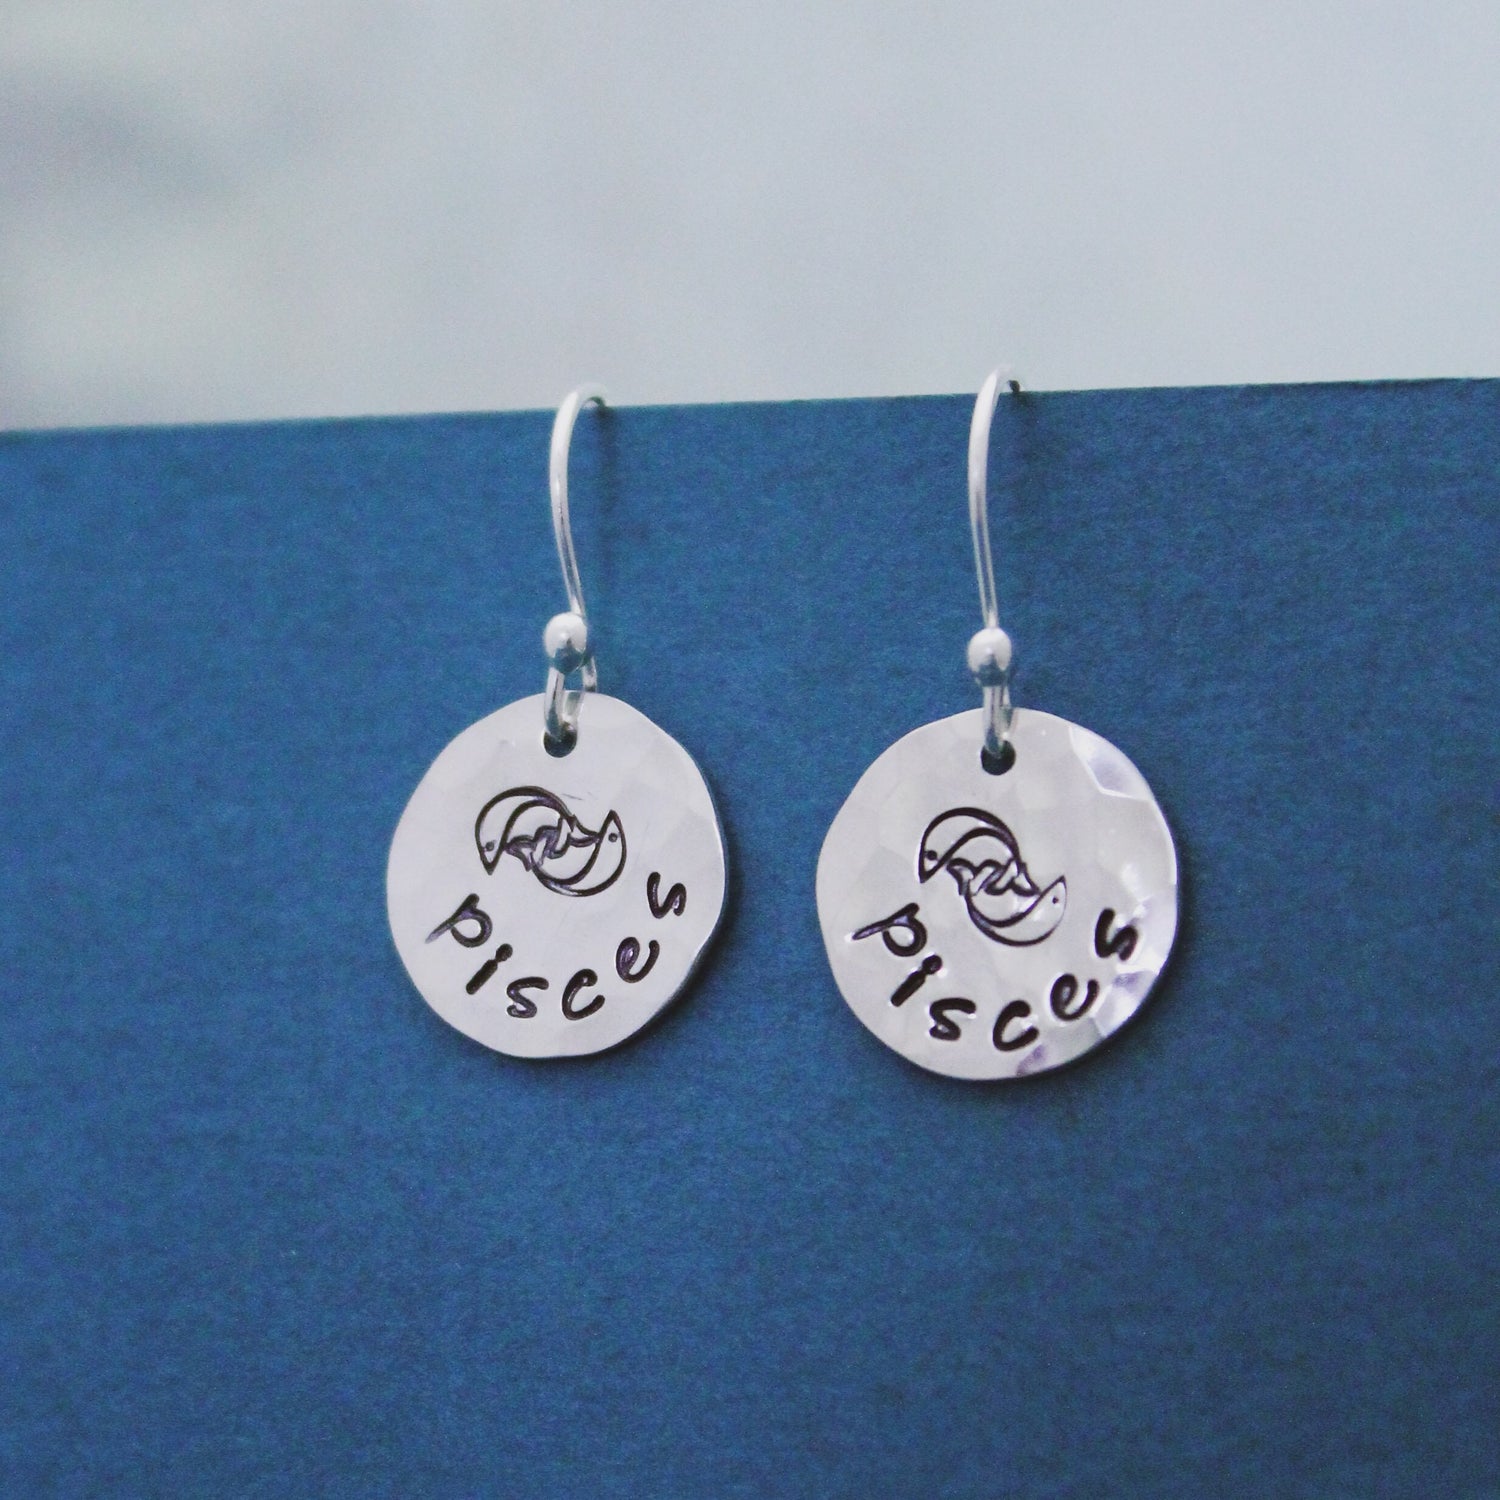 Pisces Sterling Silver Earrings, Pisces Zodiac Sign Jewelry, Hand Stamped Personalized Earrings, Pisces Zodiac Jewelry Unique Gift for Her